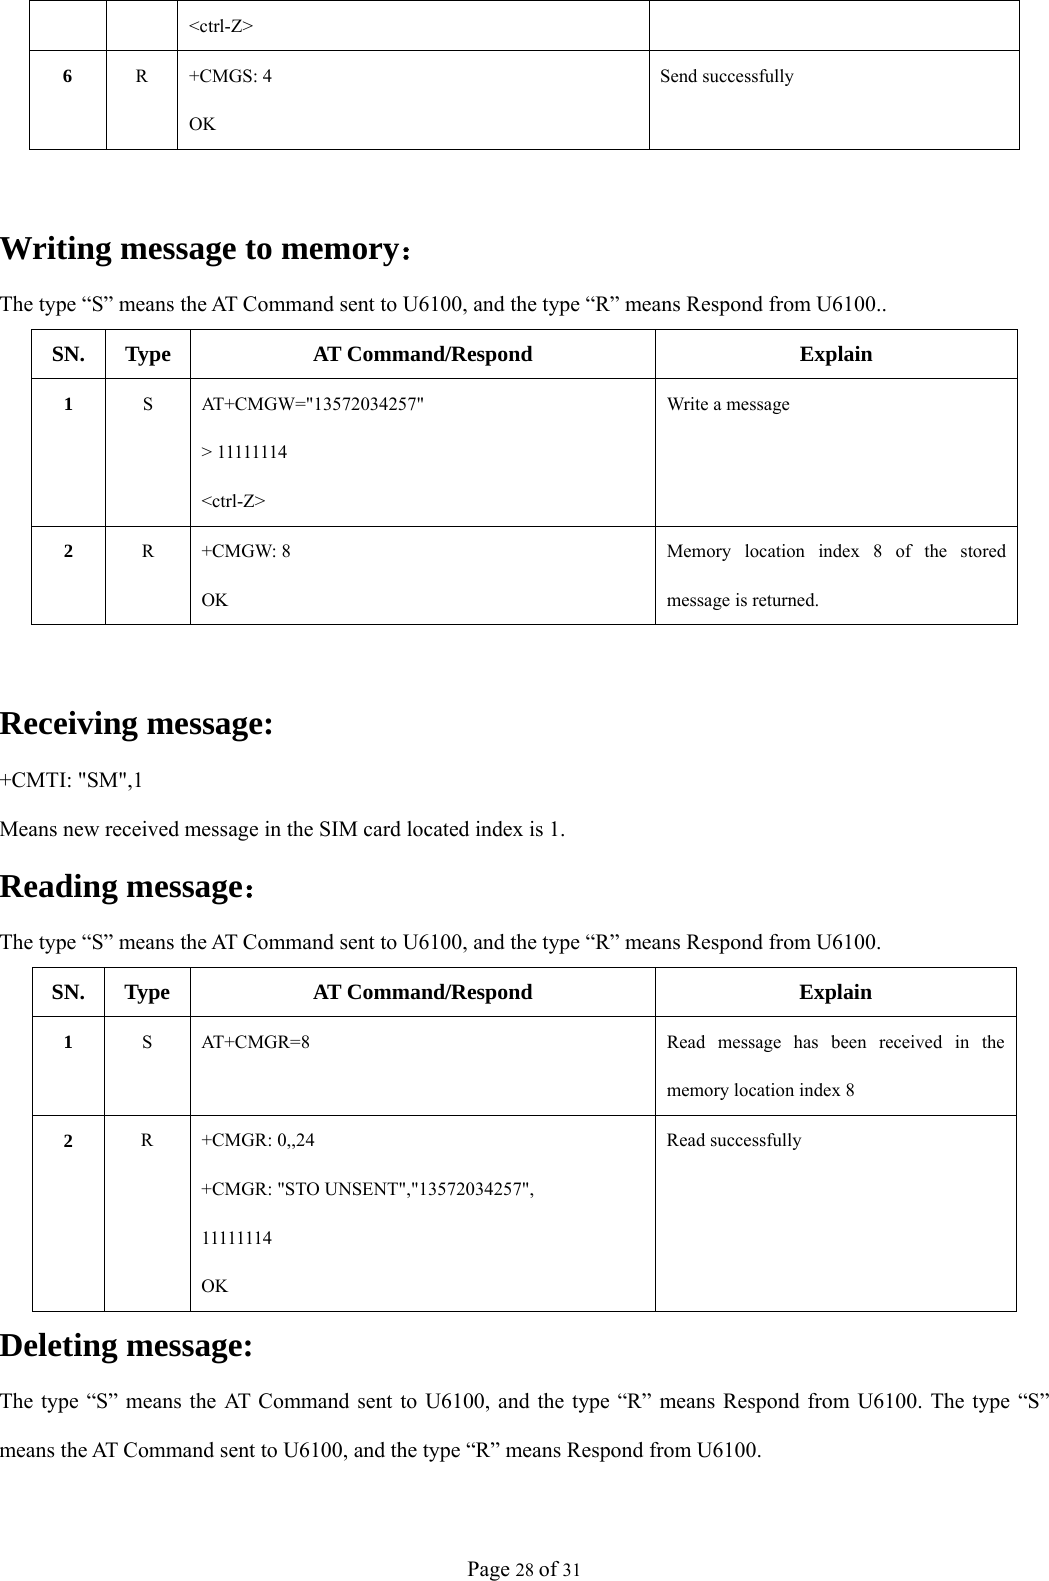 Page 28 of 31 &lt;ctrl-Z&gt; 6  R +CMGS: 4  OK Send successfully  Writing message to memory： The type “S” means the AT Command sent to U6100, and the type “R” means Respond from U6100.. SN. Type  AT Command/Respond  Explain 1  S AT+CMGW=&quot;13572034257&quot; &gt; 11111114 &lt;ctrl-Z&gt; Write a message 2  R +CMGW: 8 OK Memory location index 8 of the stored message is returned.  Receiving message: +CMTI: &quot;SM&quot;,1 Means new received message in the SIM card located index is 1. Reading message： The type “S” means the AT Command sent to U6100, and the type “R” means Respond from U6100. SN. Type  AT Command/Respond  Explain 1  S  AT+CMGR=8  Read message has been received in the memory location index 8 2  R +CMGR: 0,,24 +CMGR: &quot;STO UNSENT&quot;,&quot;13572034257&quot;, 11111114 OK Read successfully Deleting message: The type “S” means the AT Command sent to U6100, and the type “R” means Respond from U6100. The type “S” means the AT Command sent to U6100, and the type “R” means Respond from U6100. 